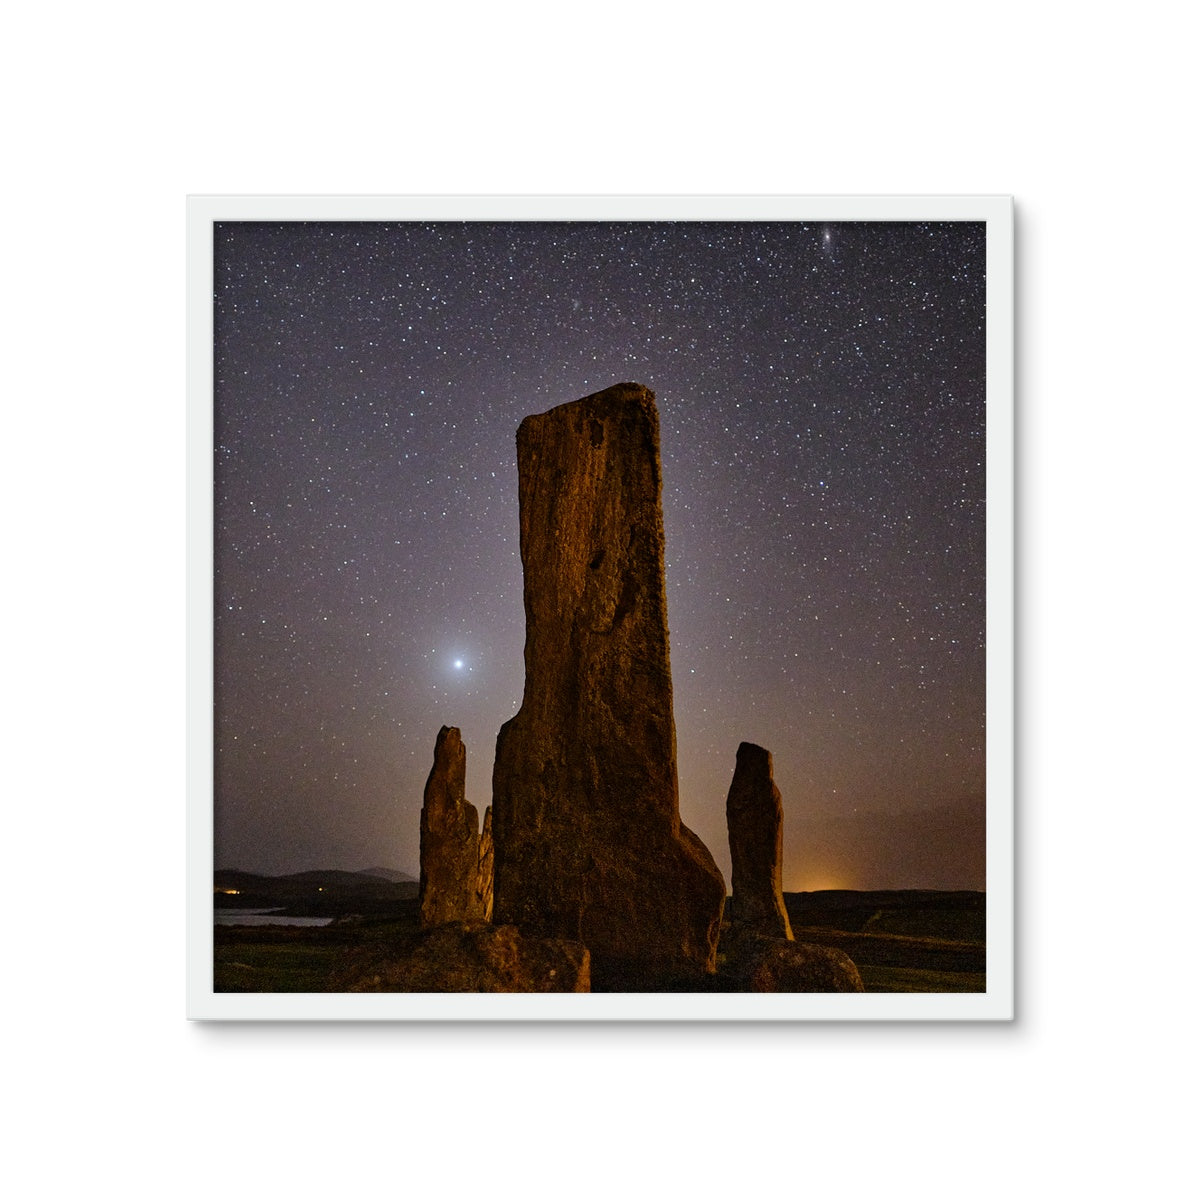 Callanish Standing Stones and Venus Framed Photo Tile